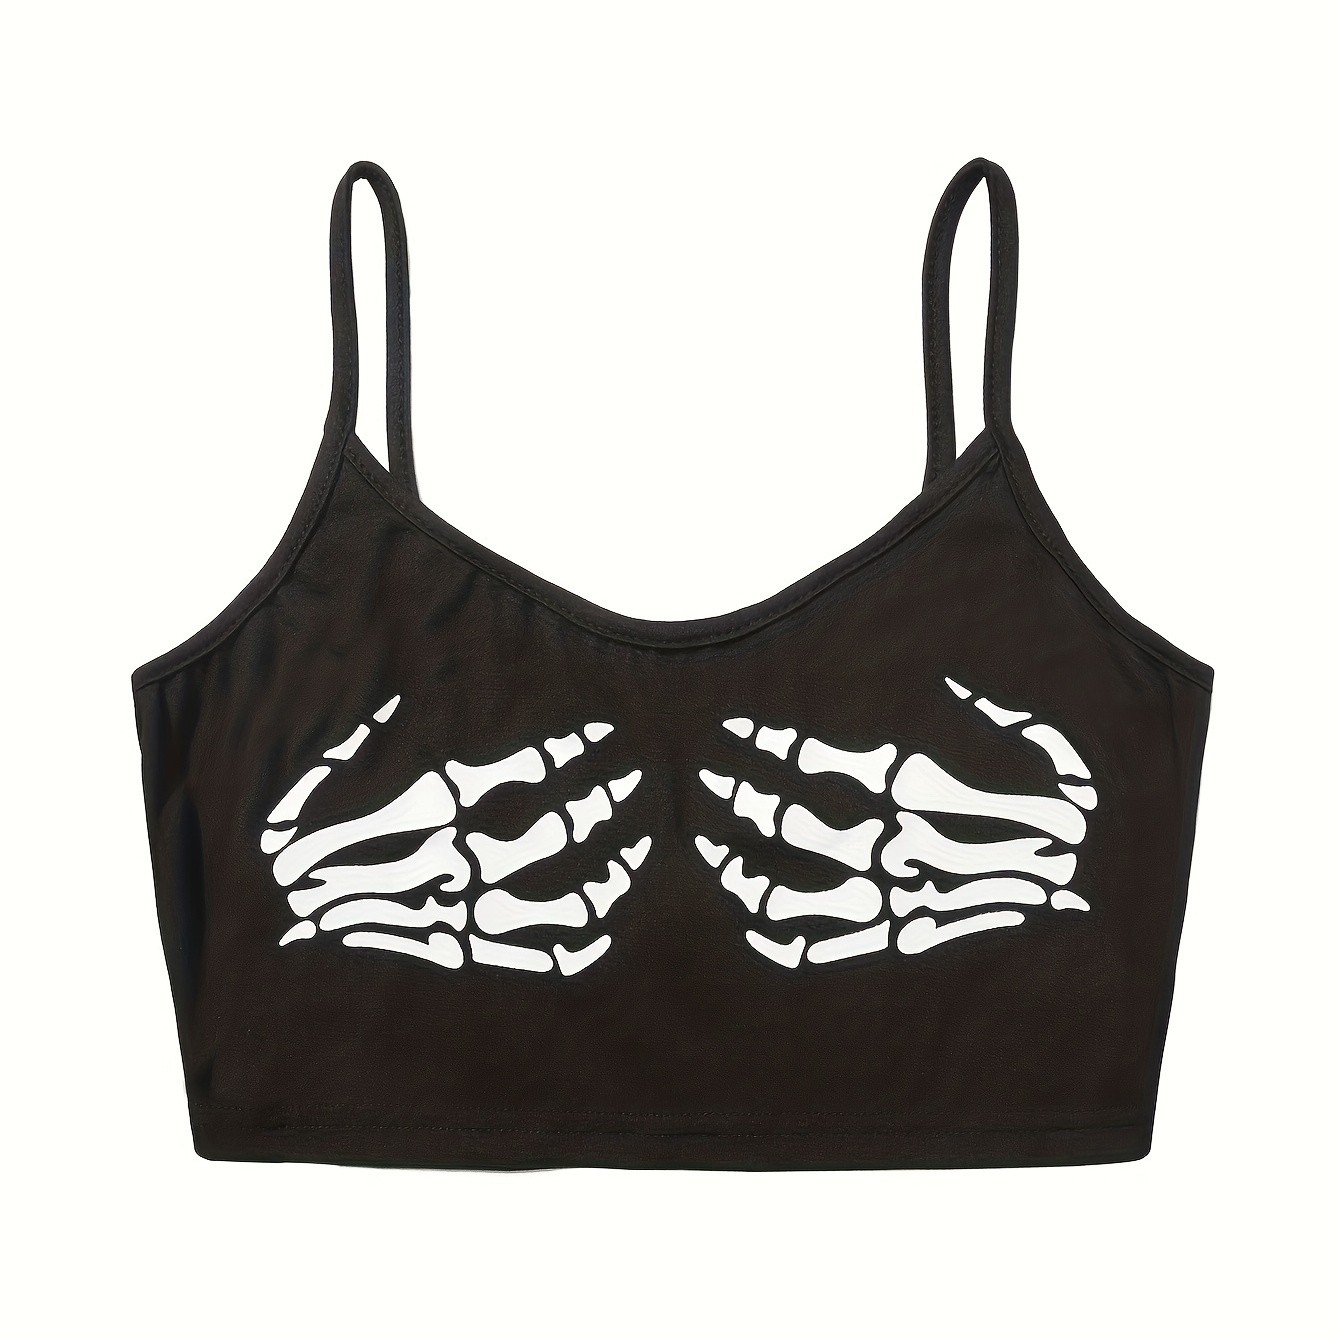 

Skull Print Spaghetti Strap Top, Casual Sleeveless Crop Cami Top For Spring & Summer, Women's Clothing